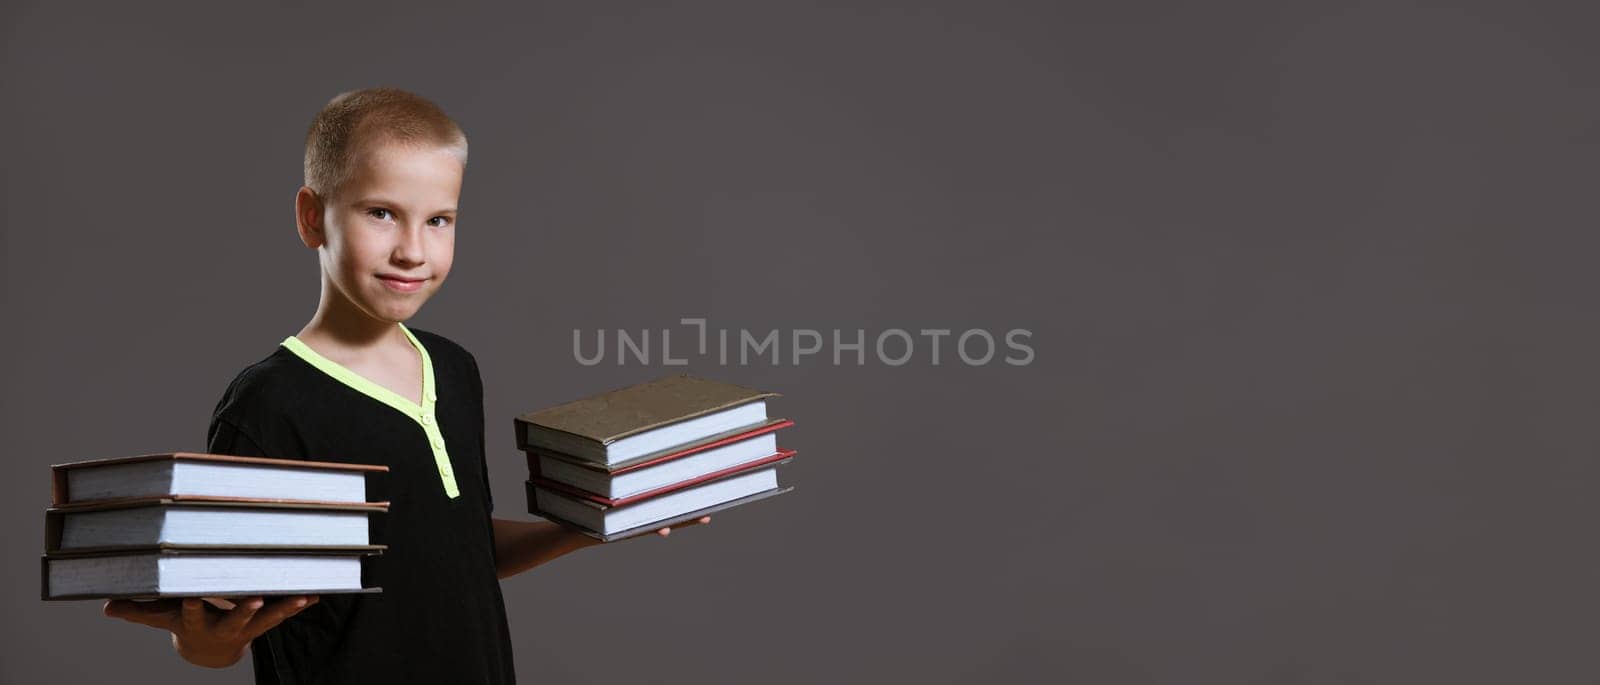 Cute boy in a black t-shirt holds stacks of books on a gray background